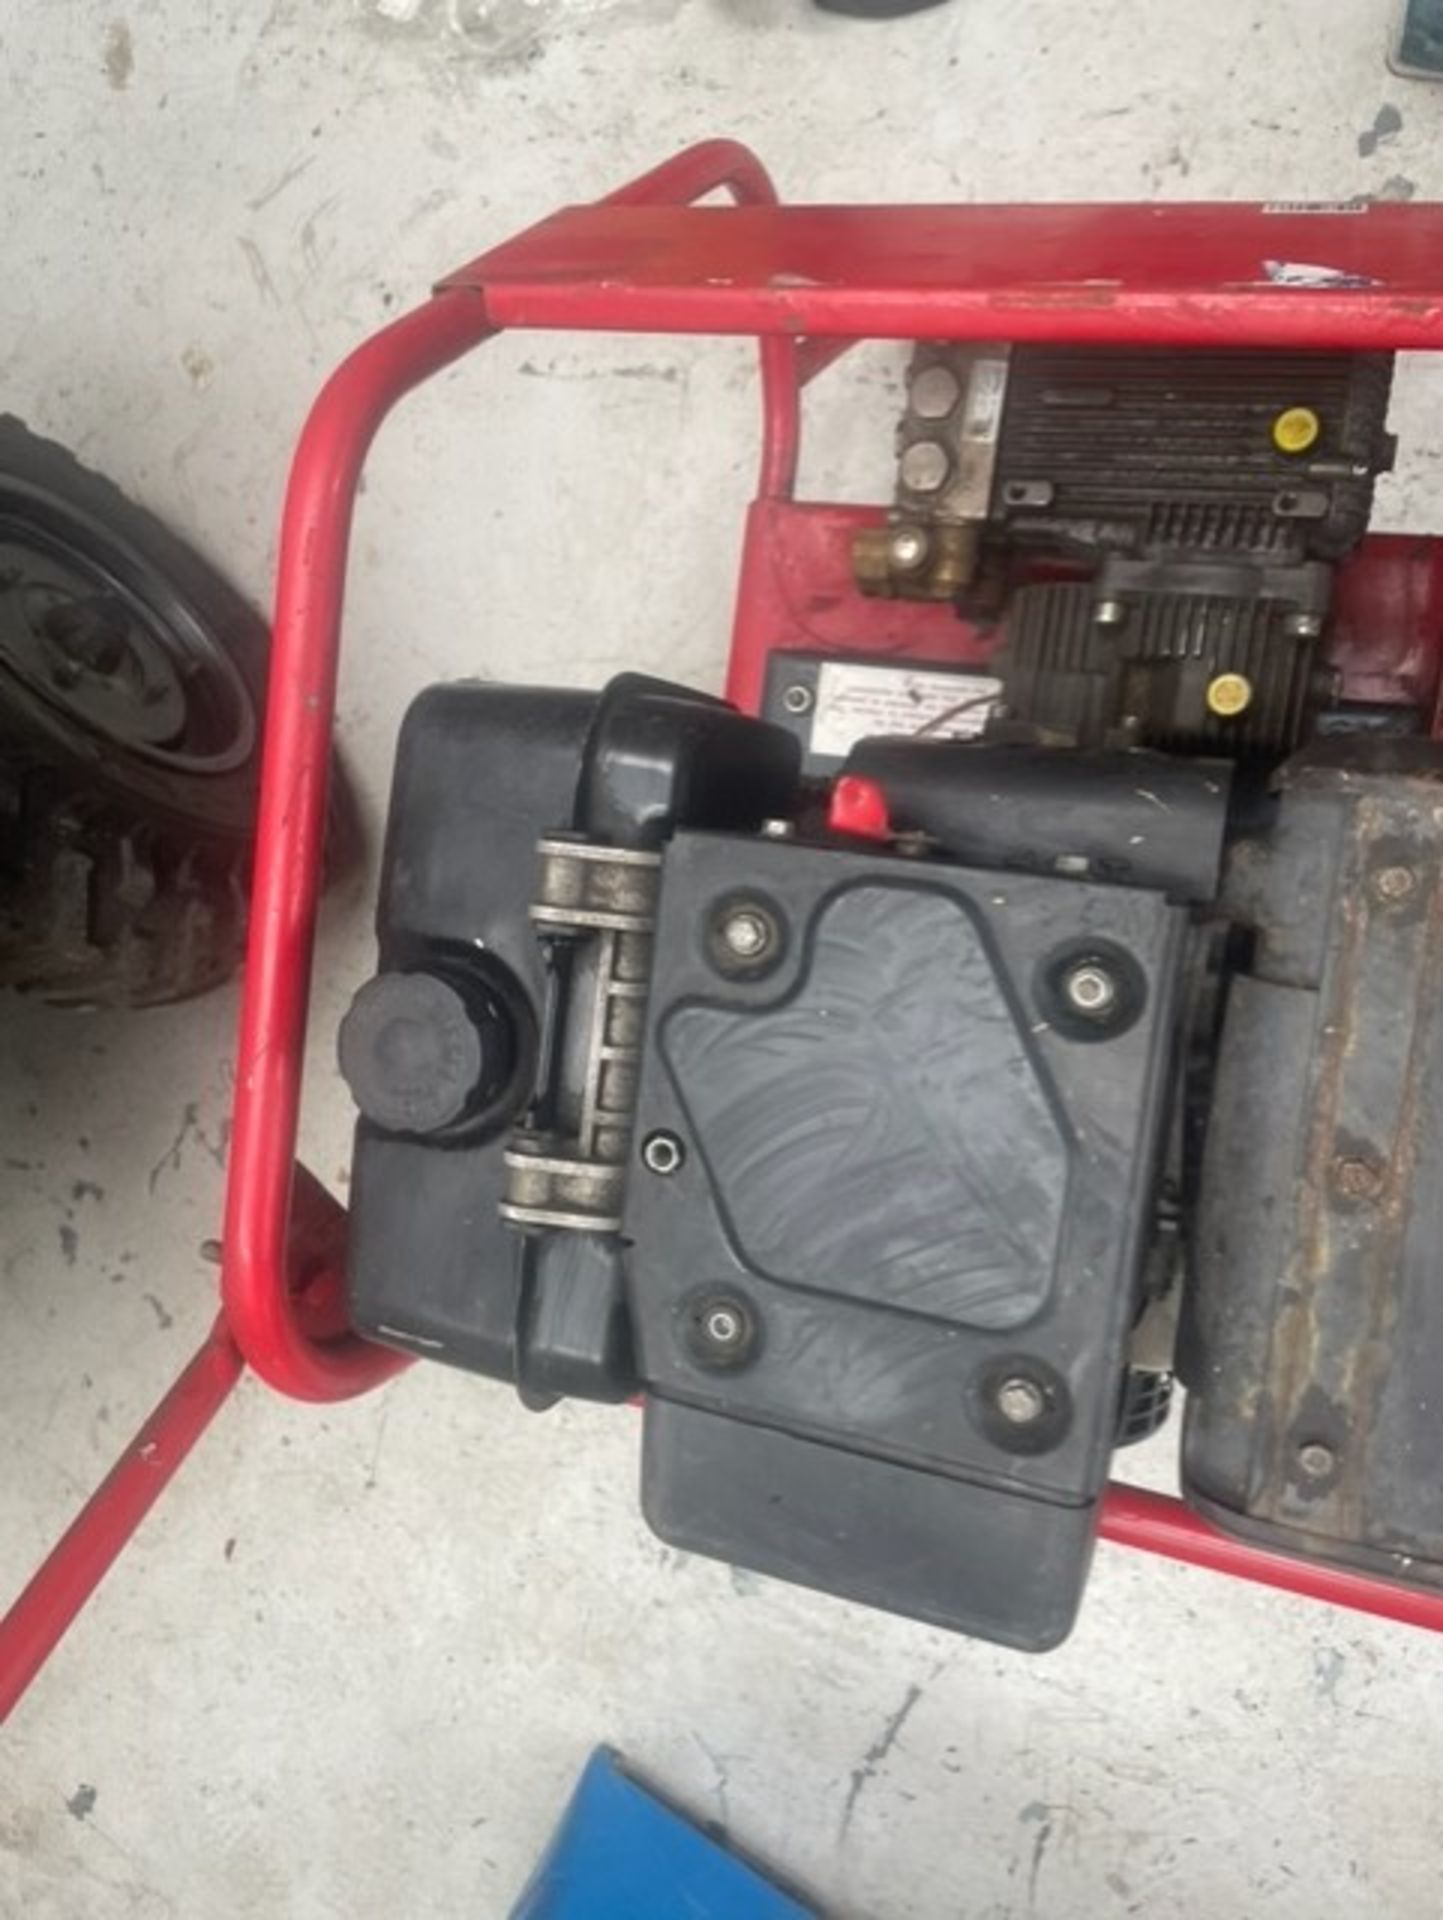 Demon diesel pressure washer running with lance and hose - Image 10 of 15